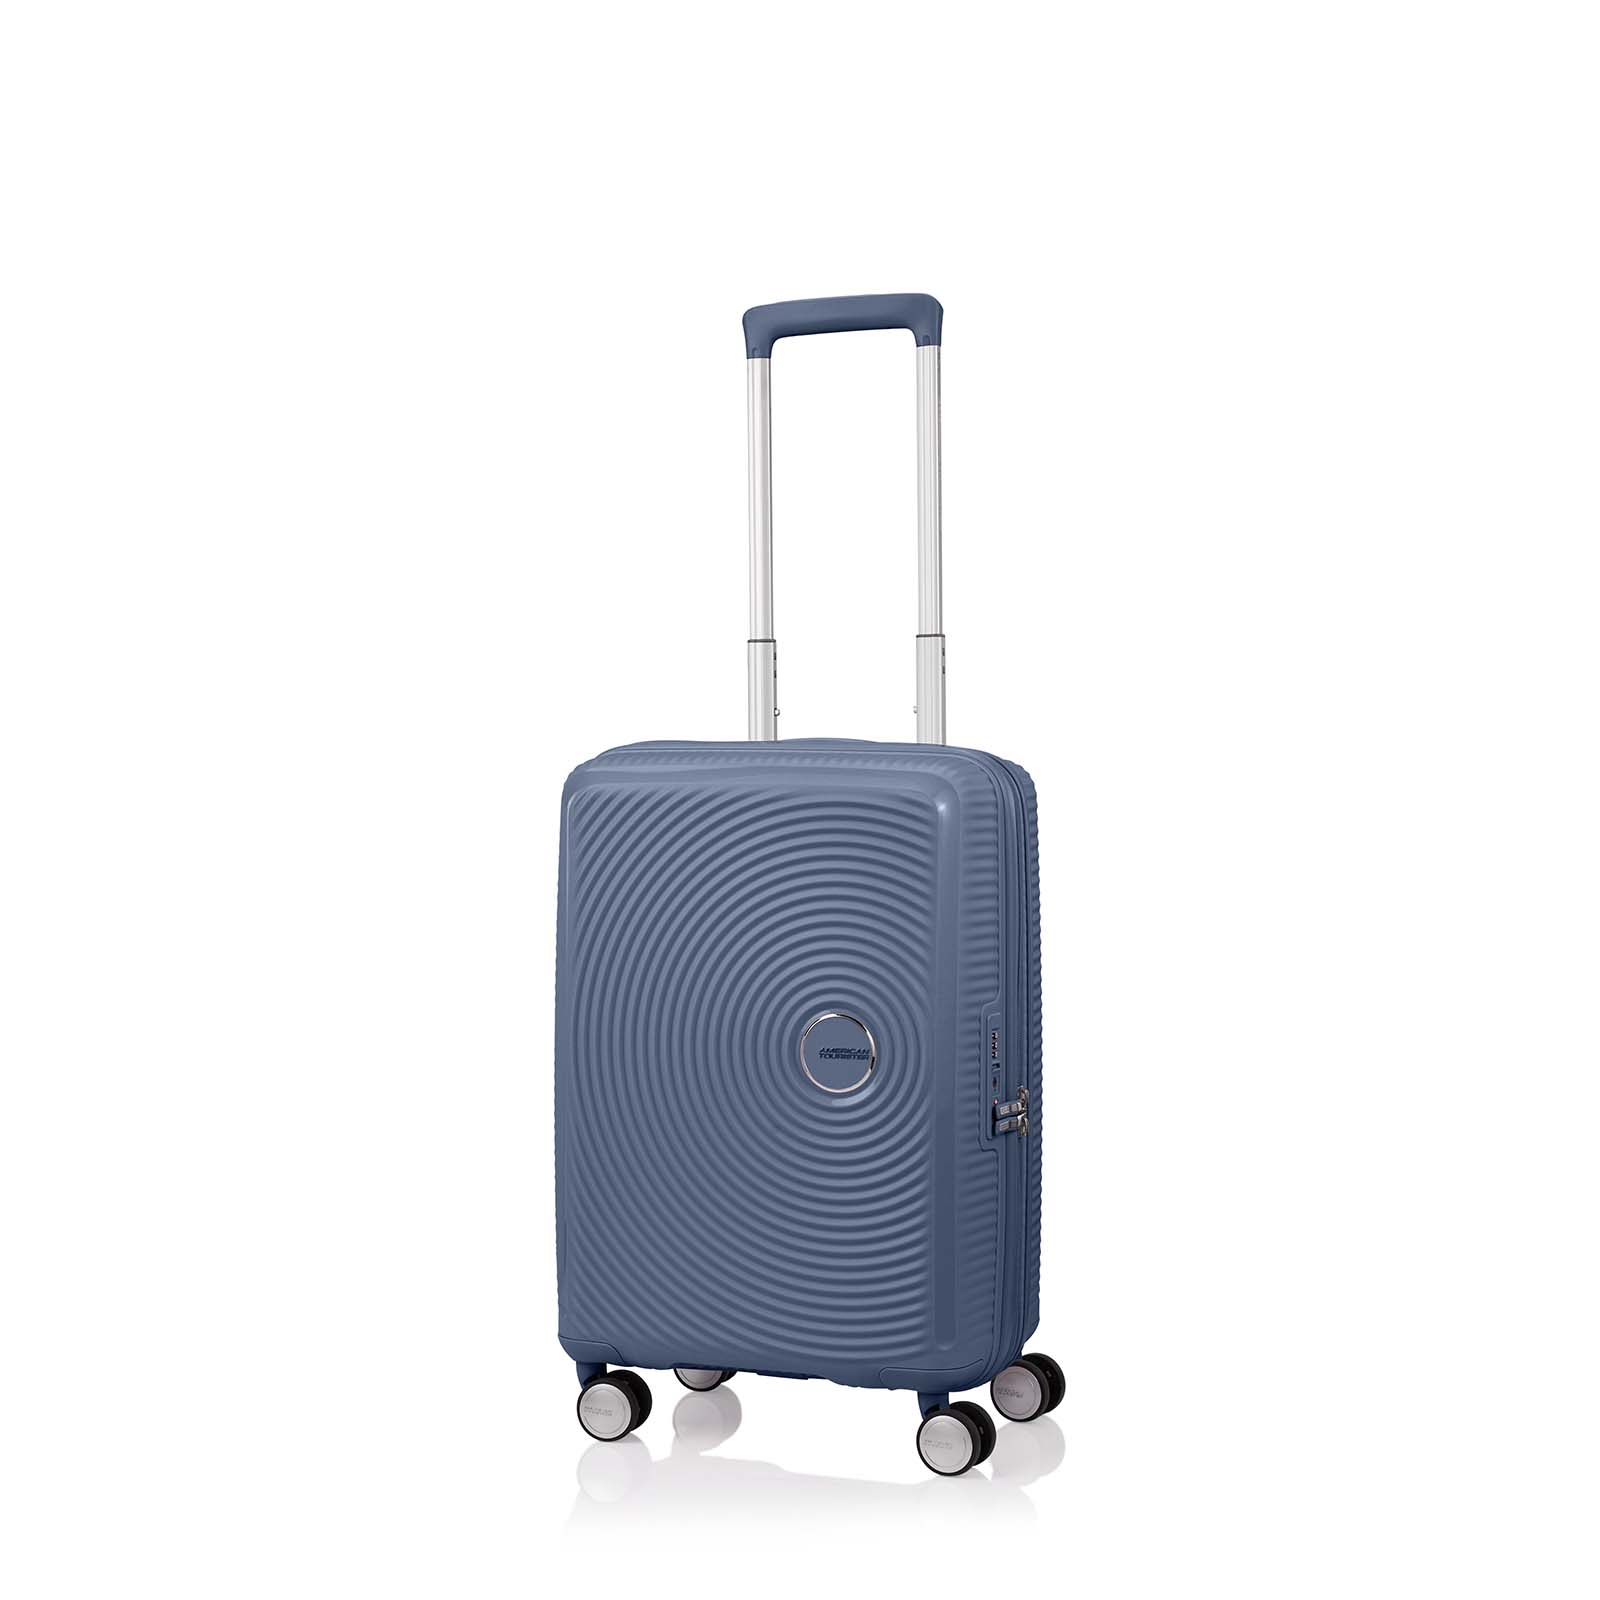 American-Tourister-Curio-2-55cm-Carry-On-Suitcase-Stone-Blue-Angle